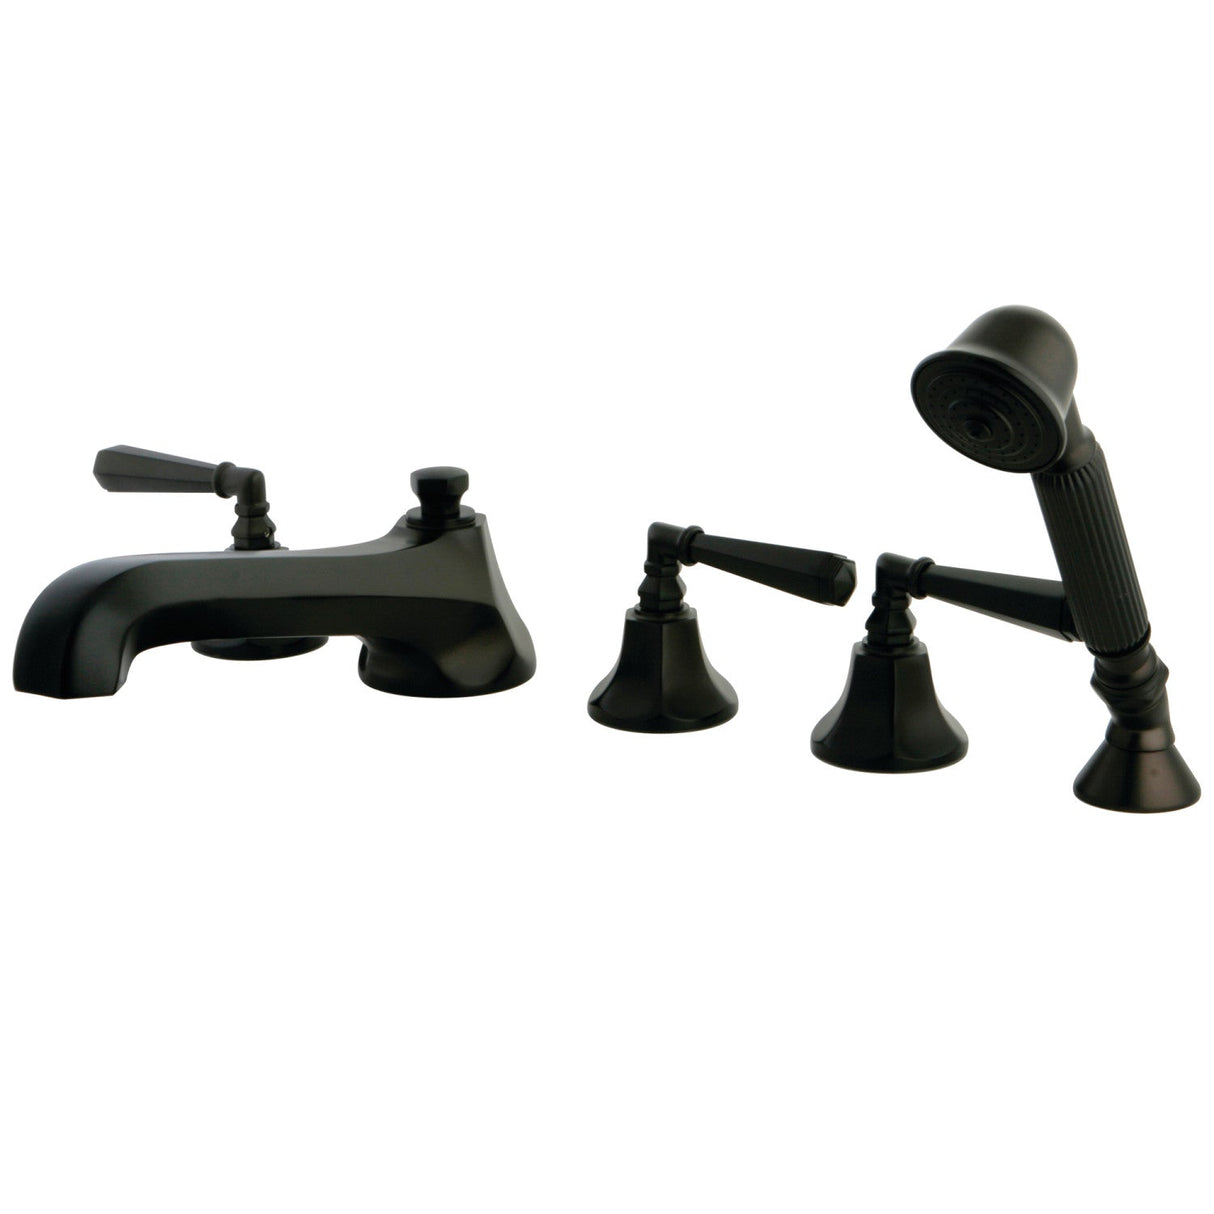 KS43055HL Three-Handle 5-Hole Deck Mount Roman Tub Faucet with Hand Shower, Oil Rubbed Bronze